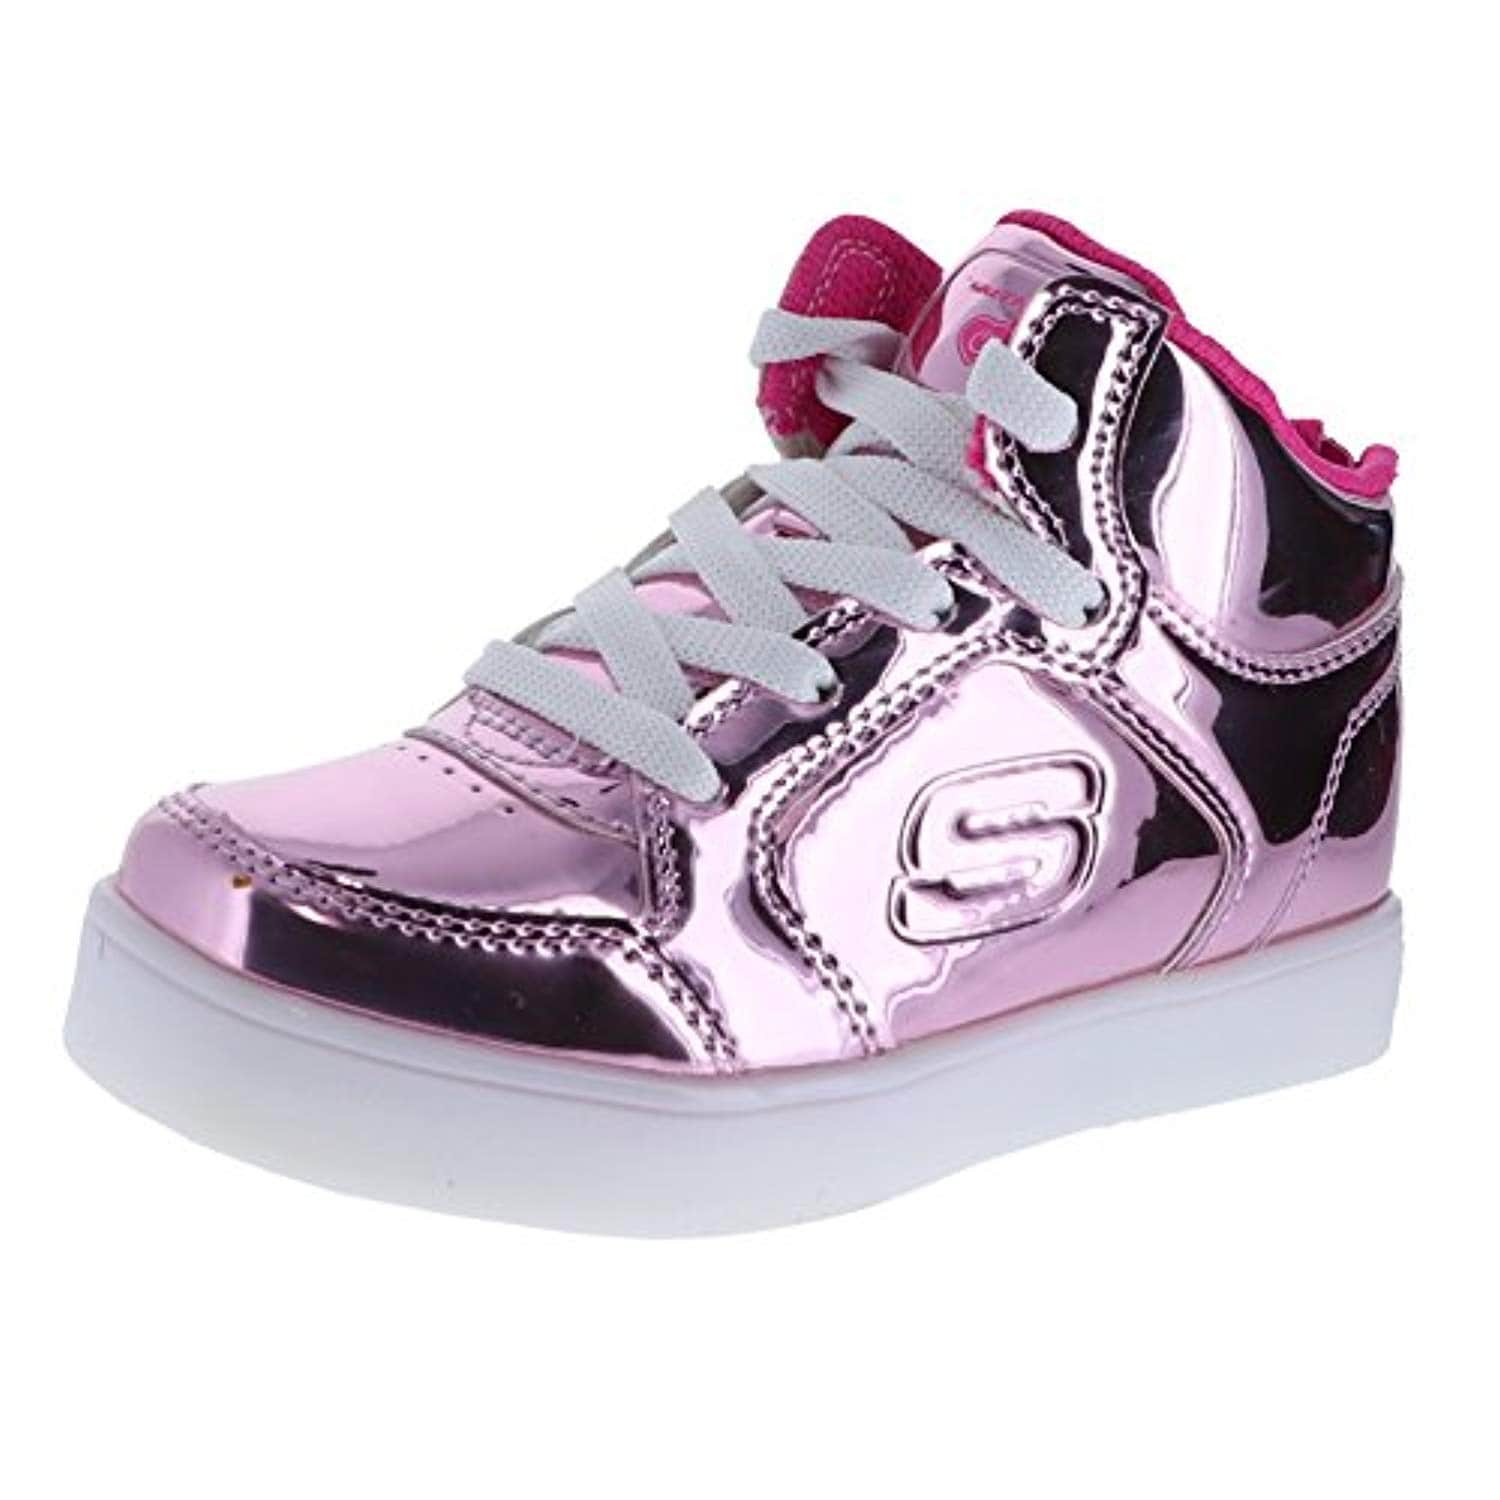 lil energy lights by skechers